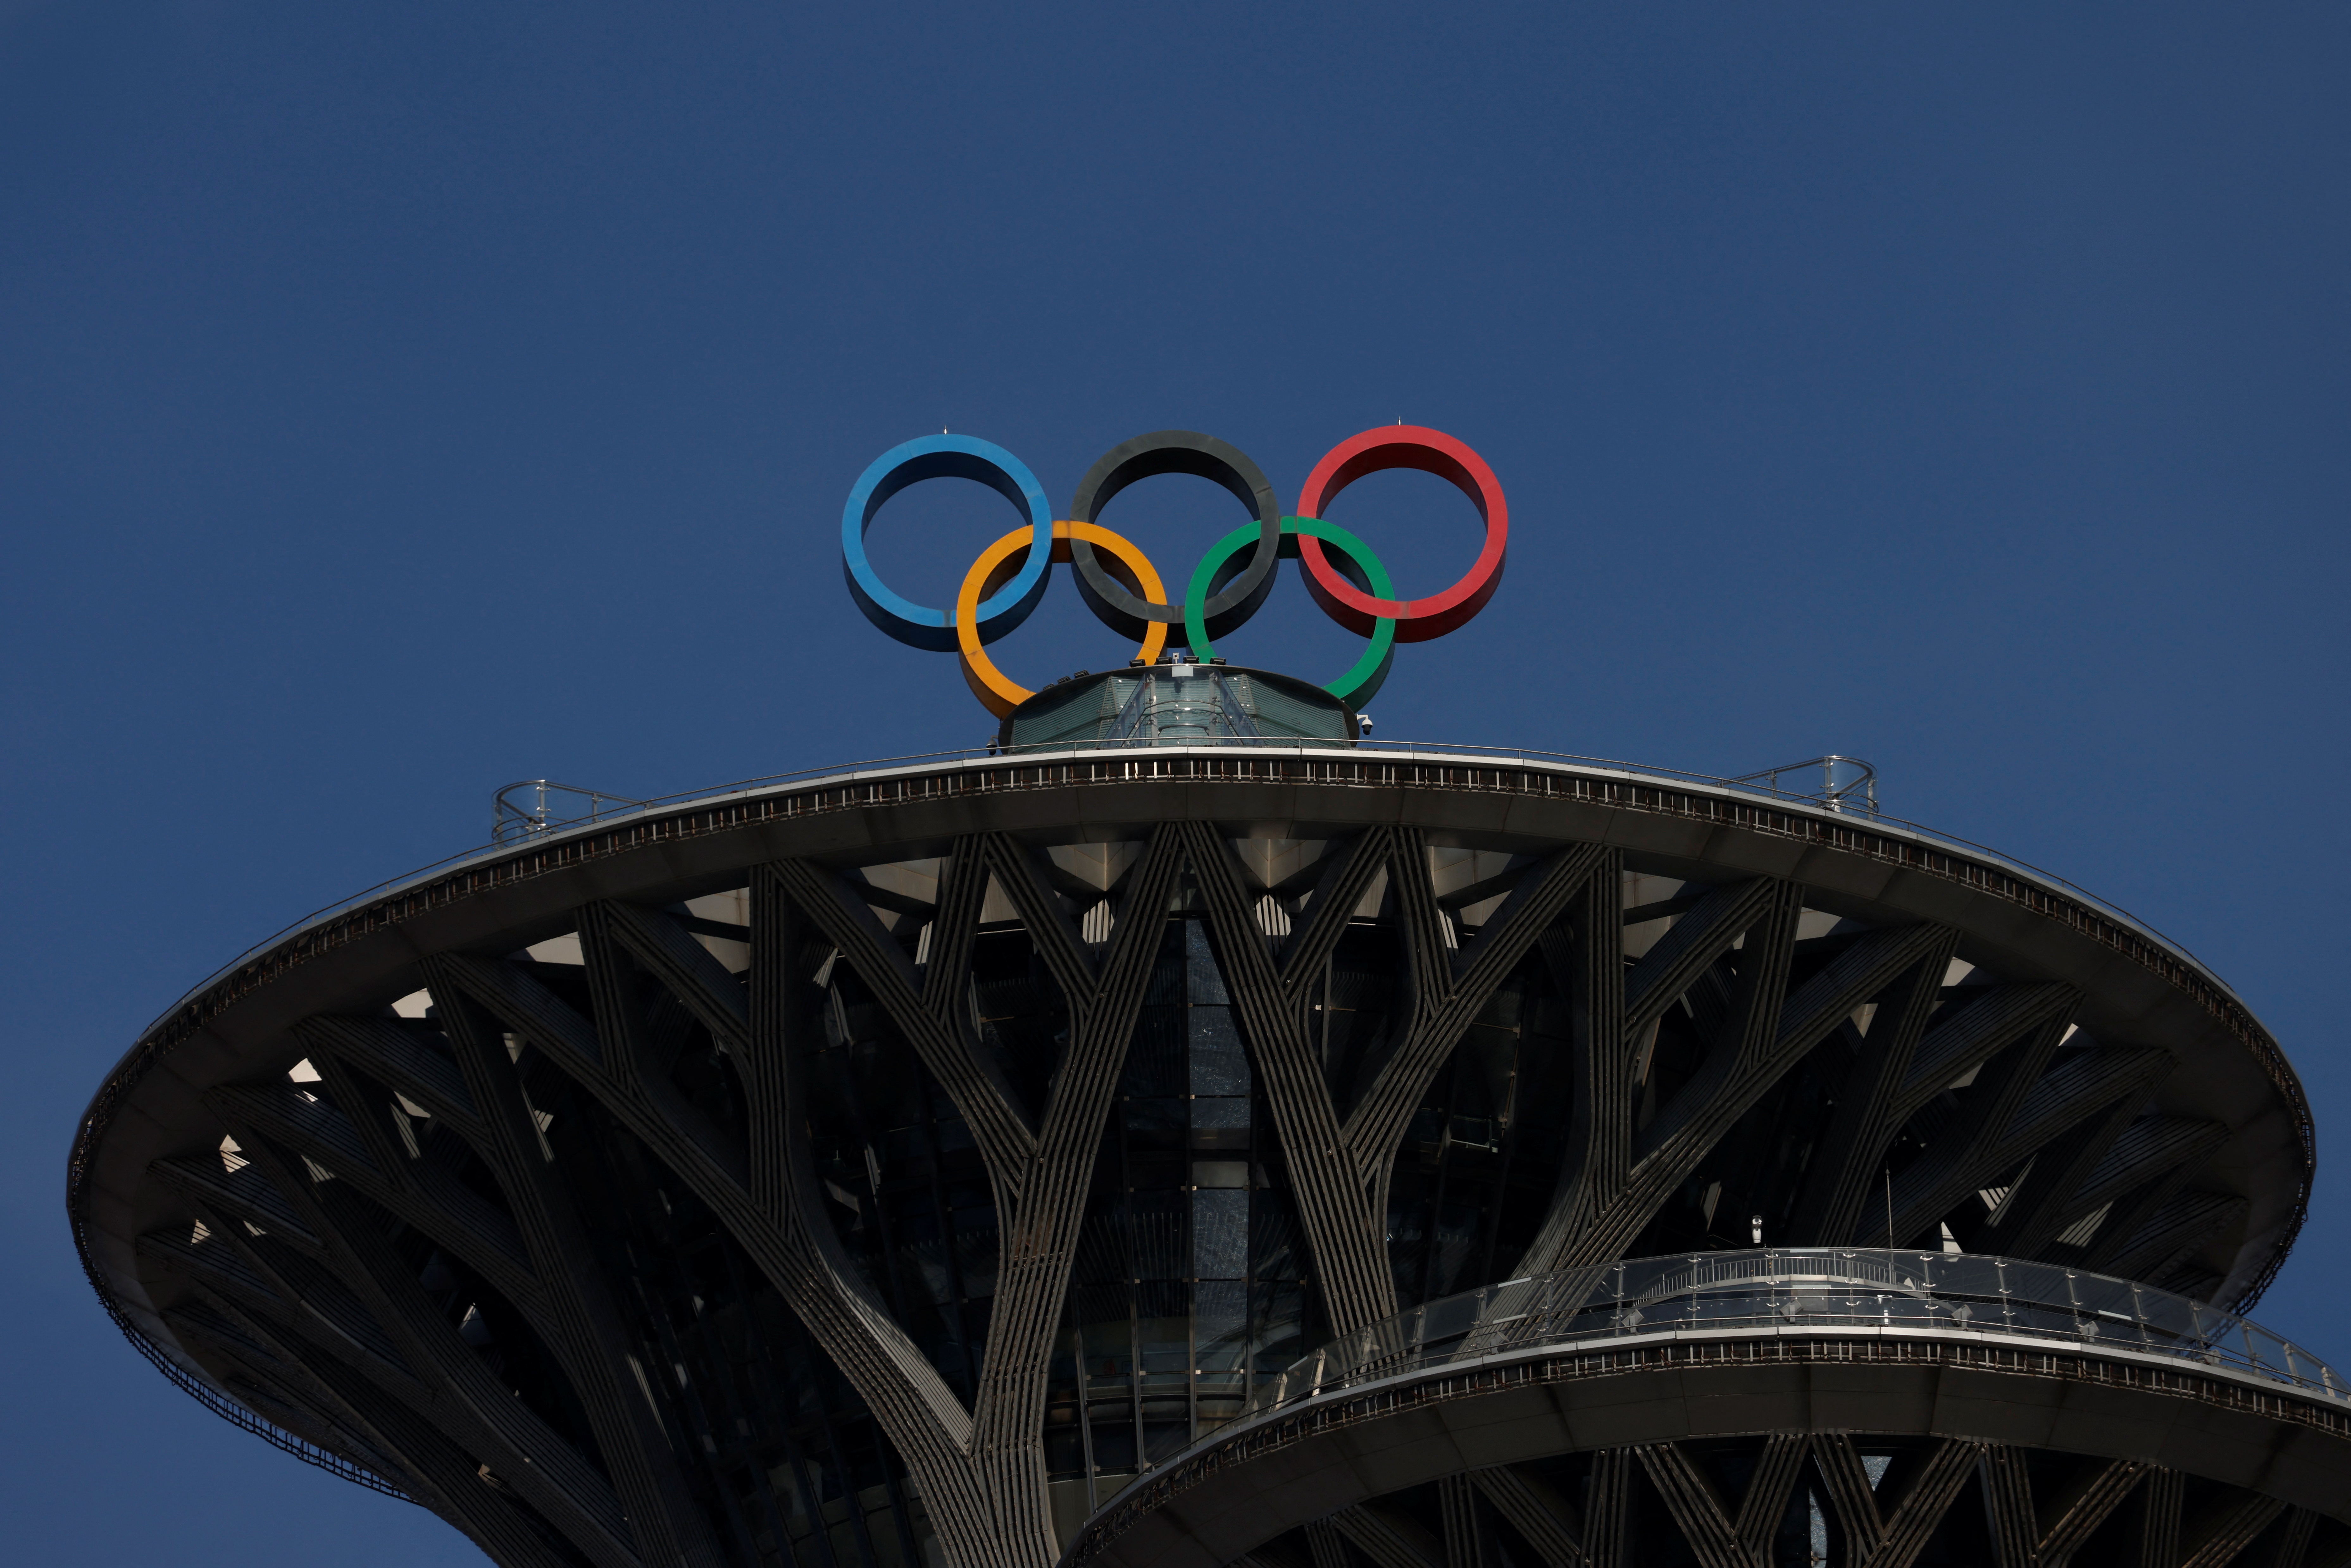 Olympic rings are pictured atop the Olympic Tower during the Beijing 2022 Winter Olympics, in Beijing